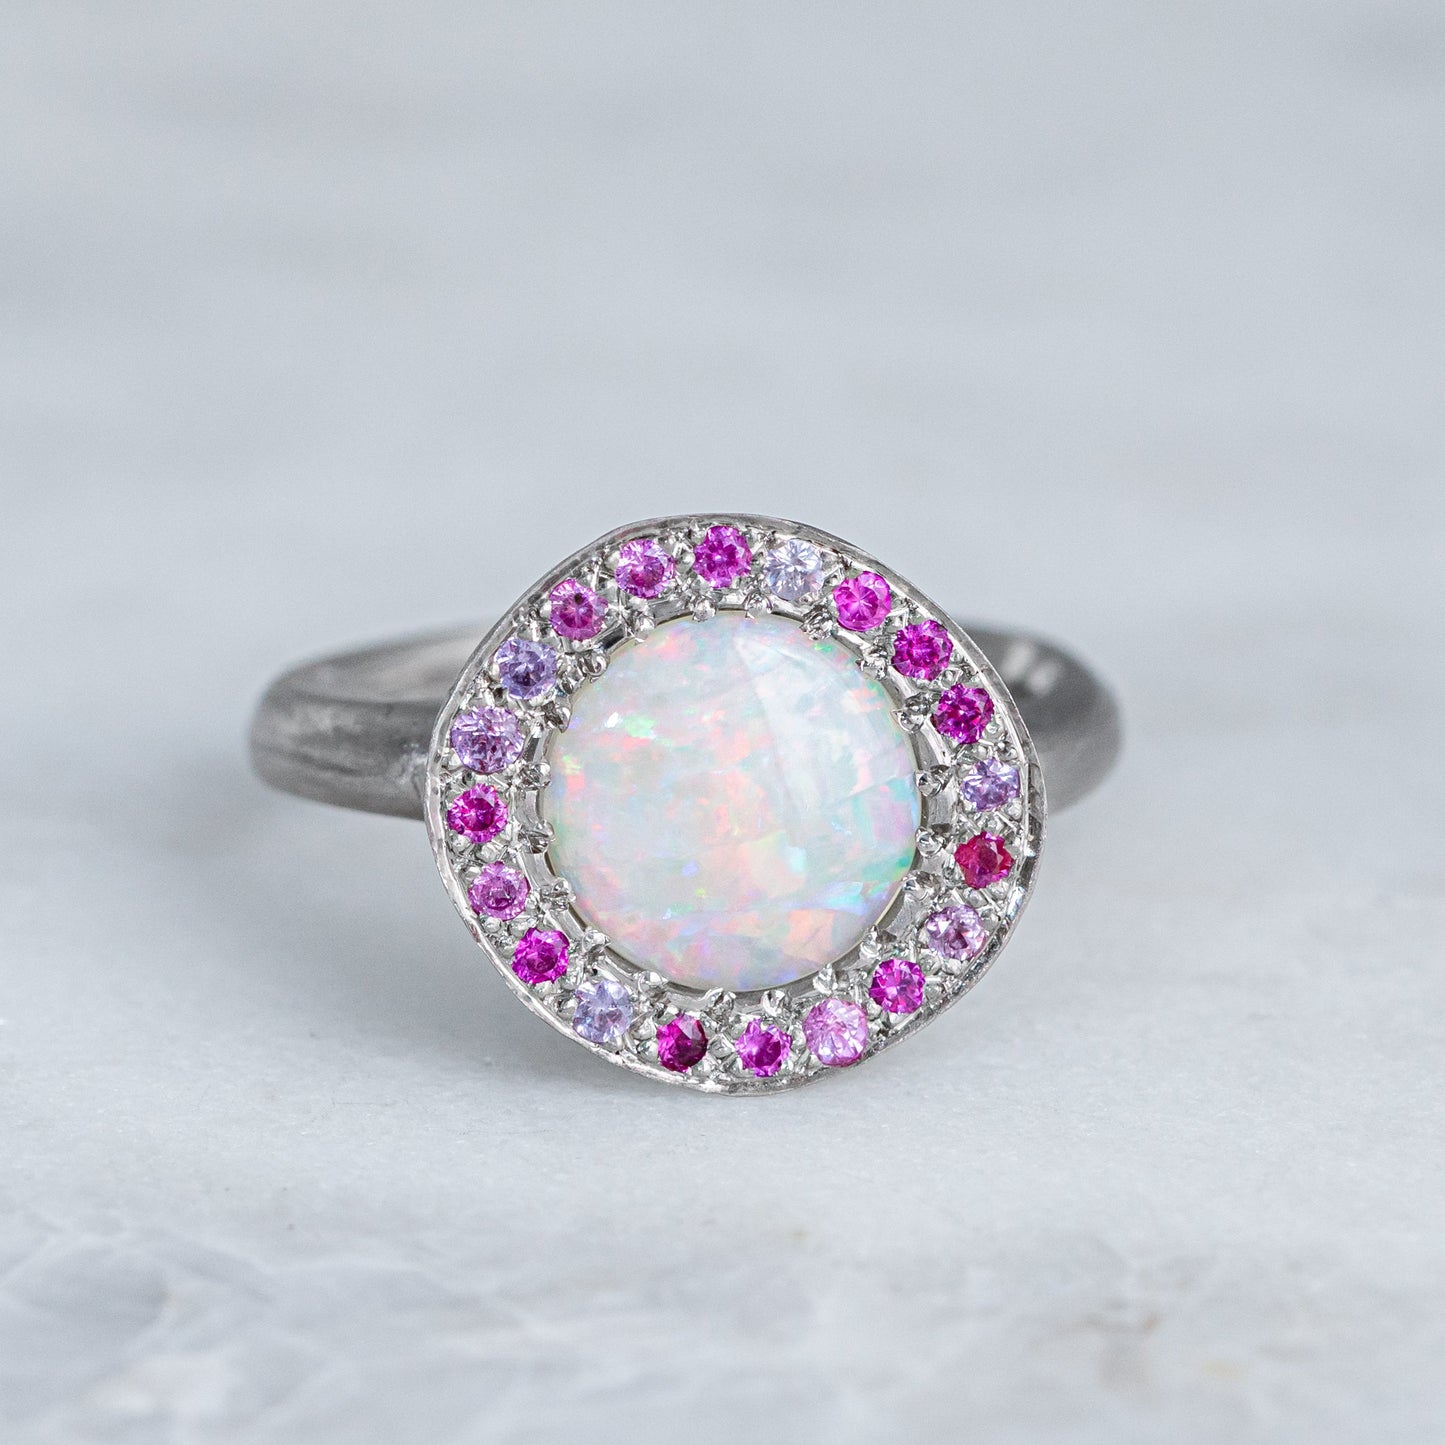 Shades Of Pink Opal Eclipse Ring In 14ct White Gold, Size P (In Stock)